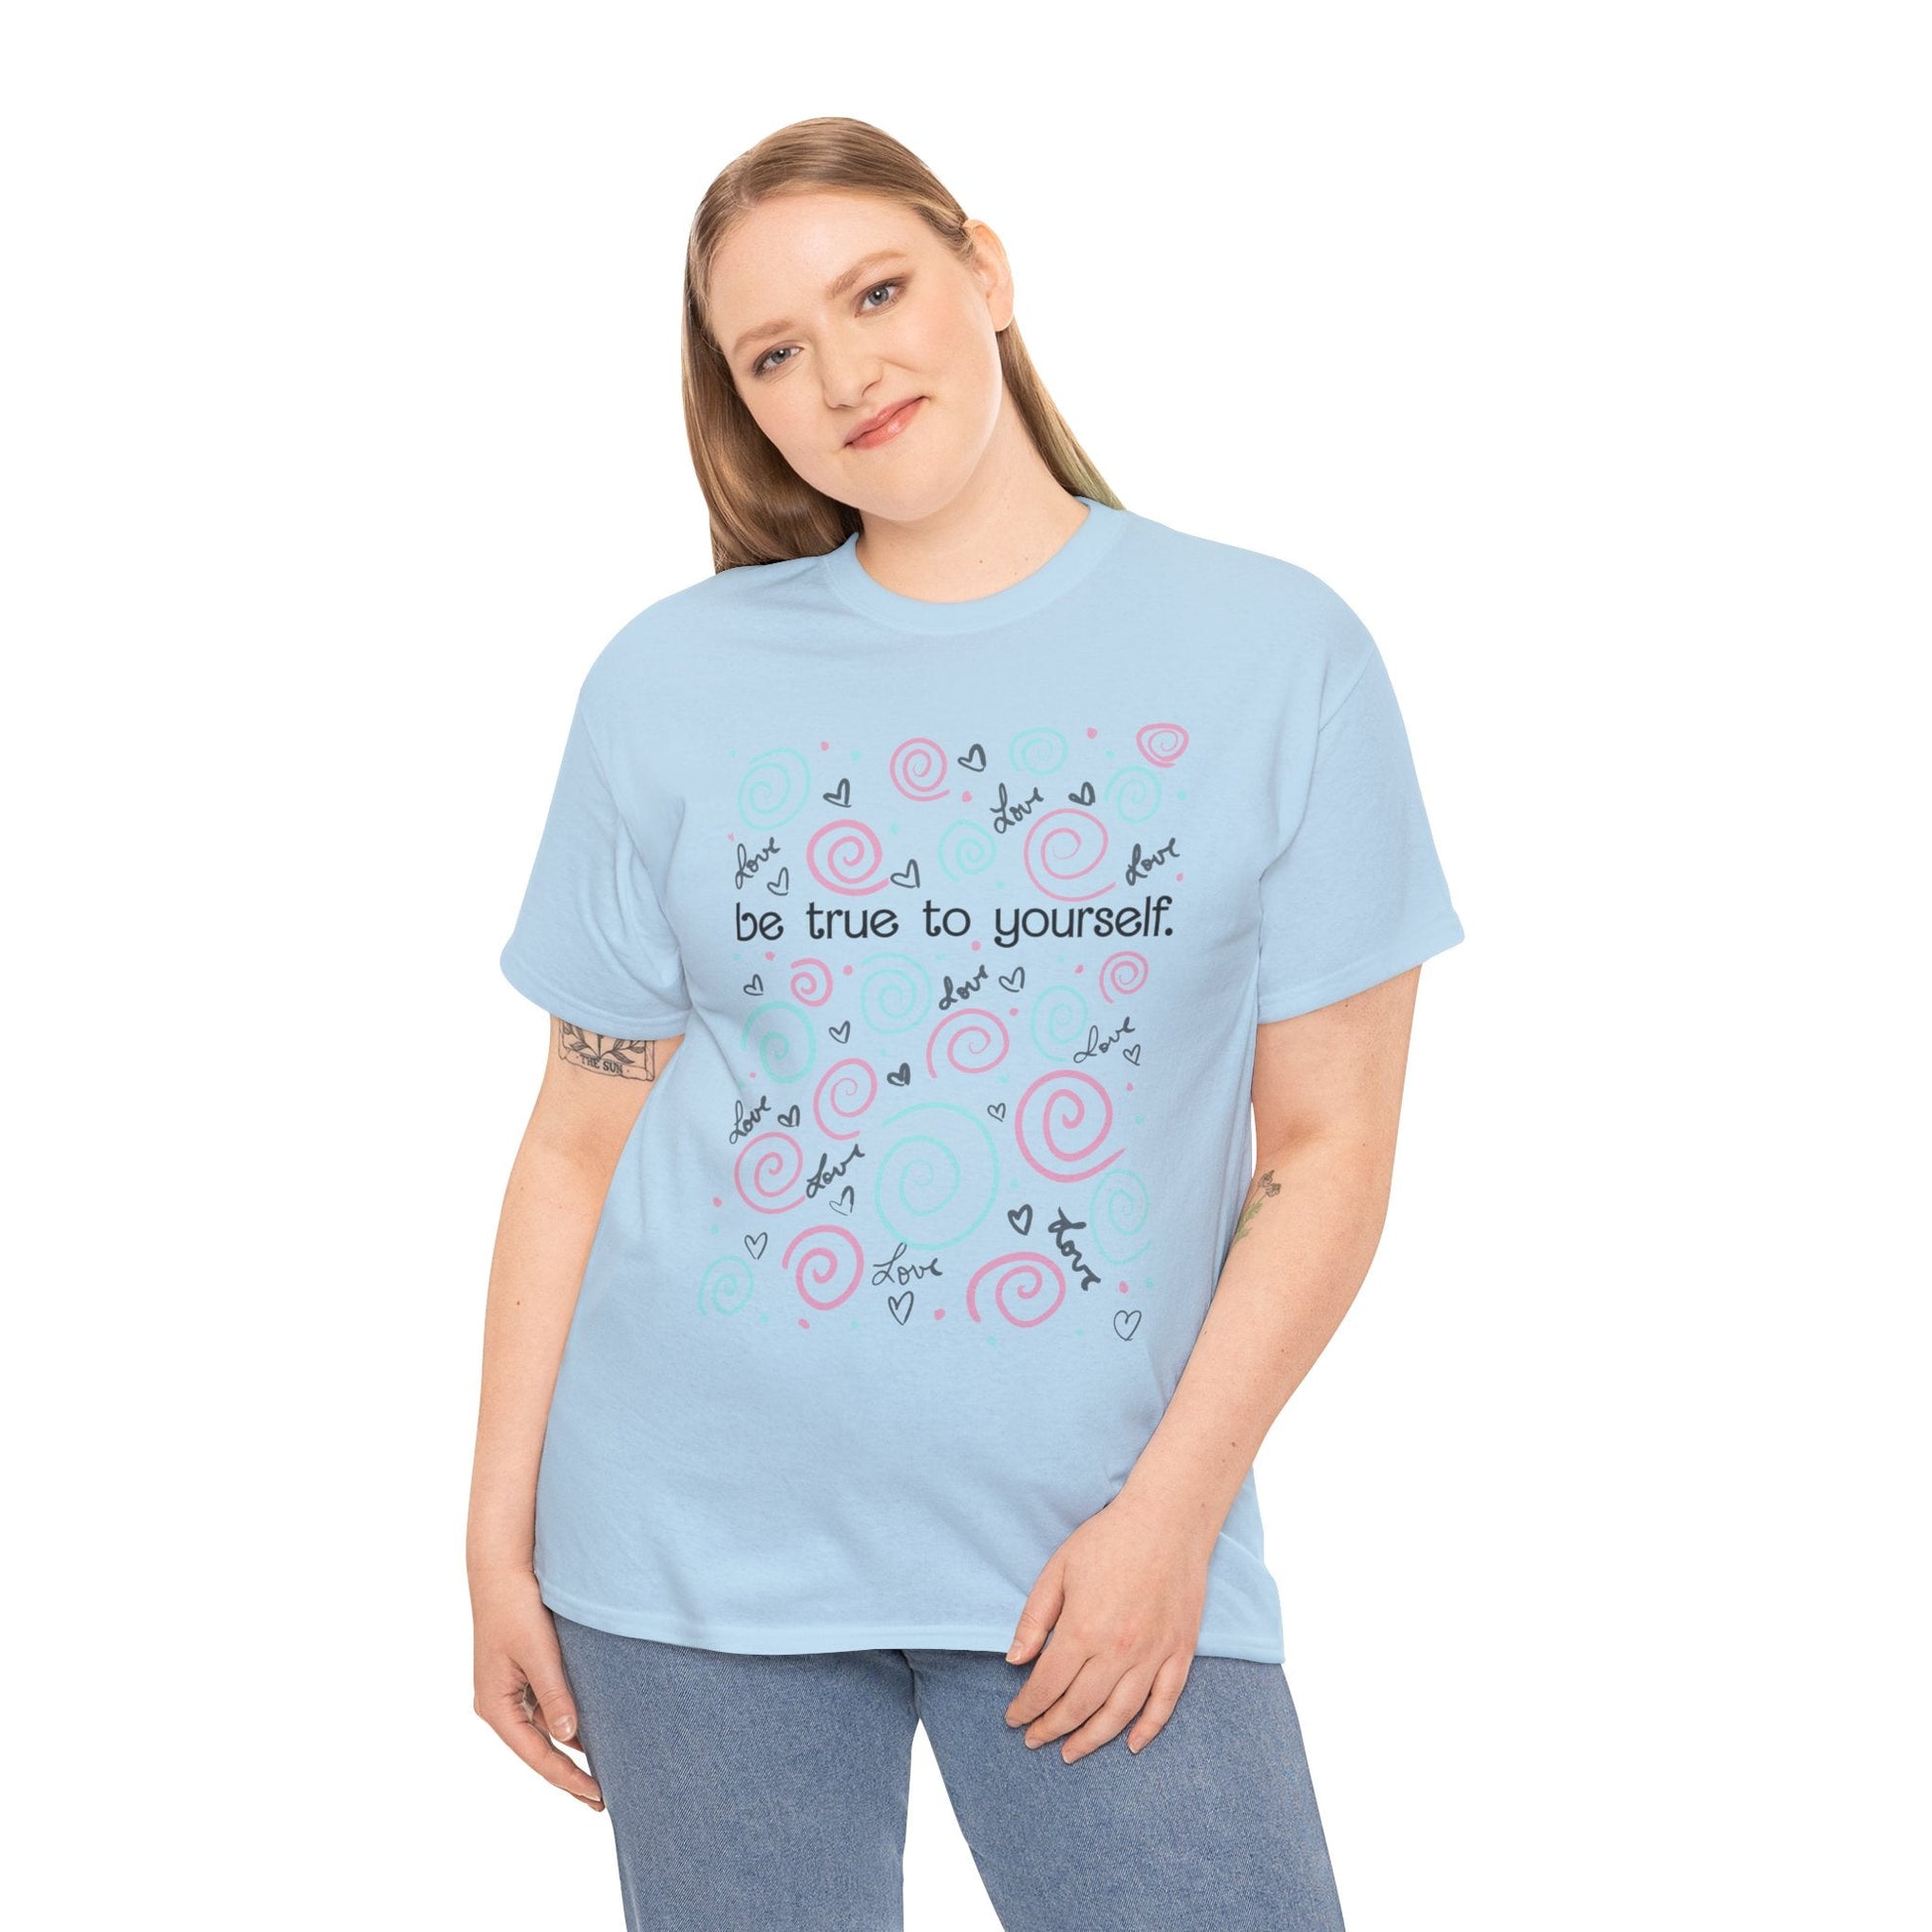 Trans Love 3.0 Be True To Yourself Ultimate Unisex Cotton Tee! - T - Shirt